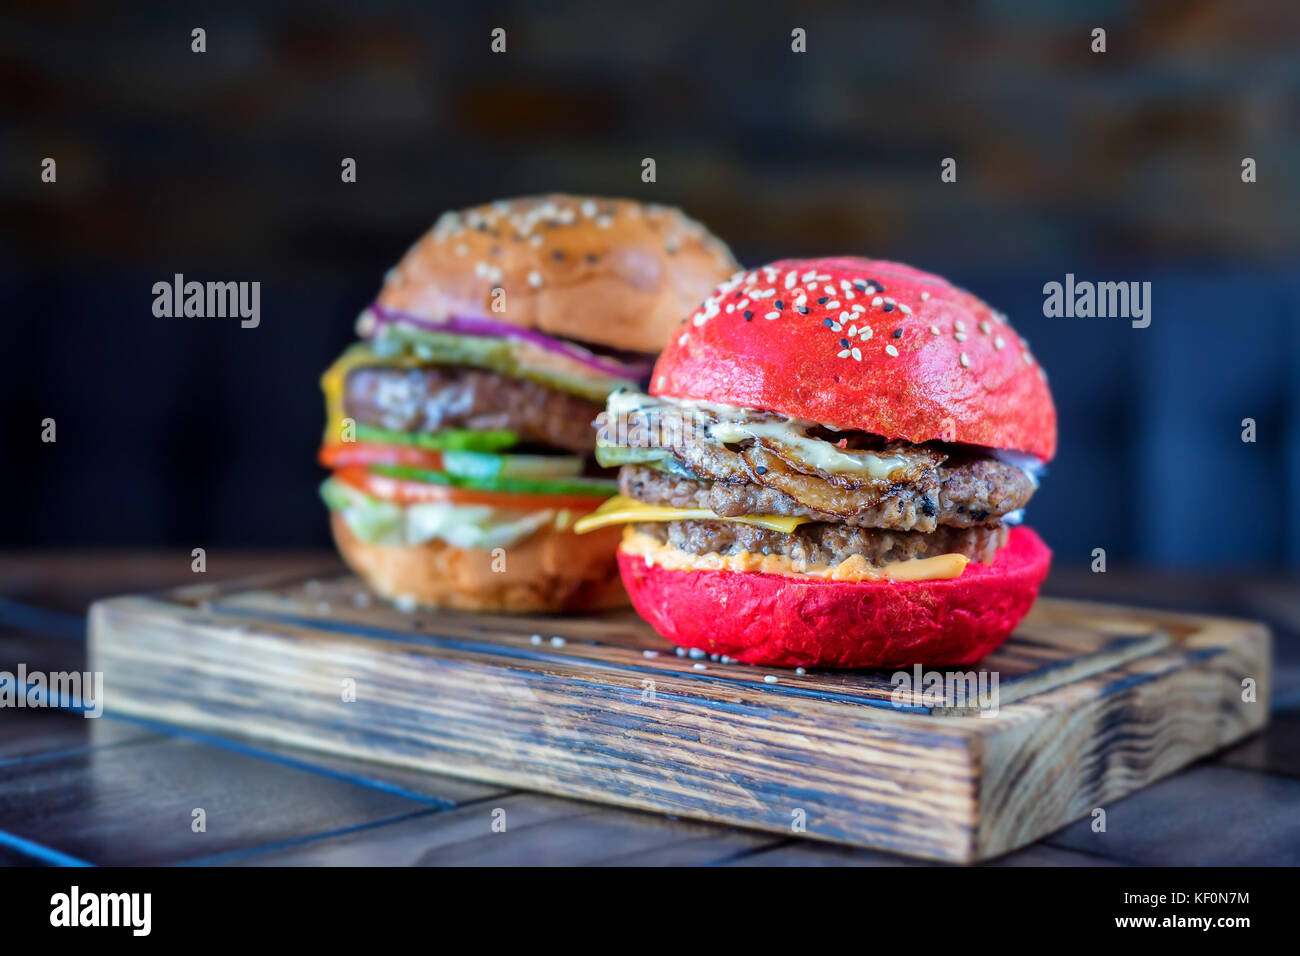 Two different restaurant burgers on wooden board Stock Photo